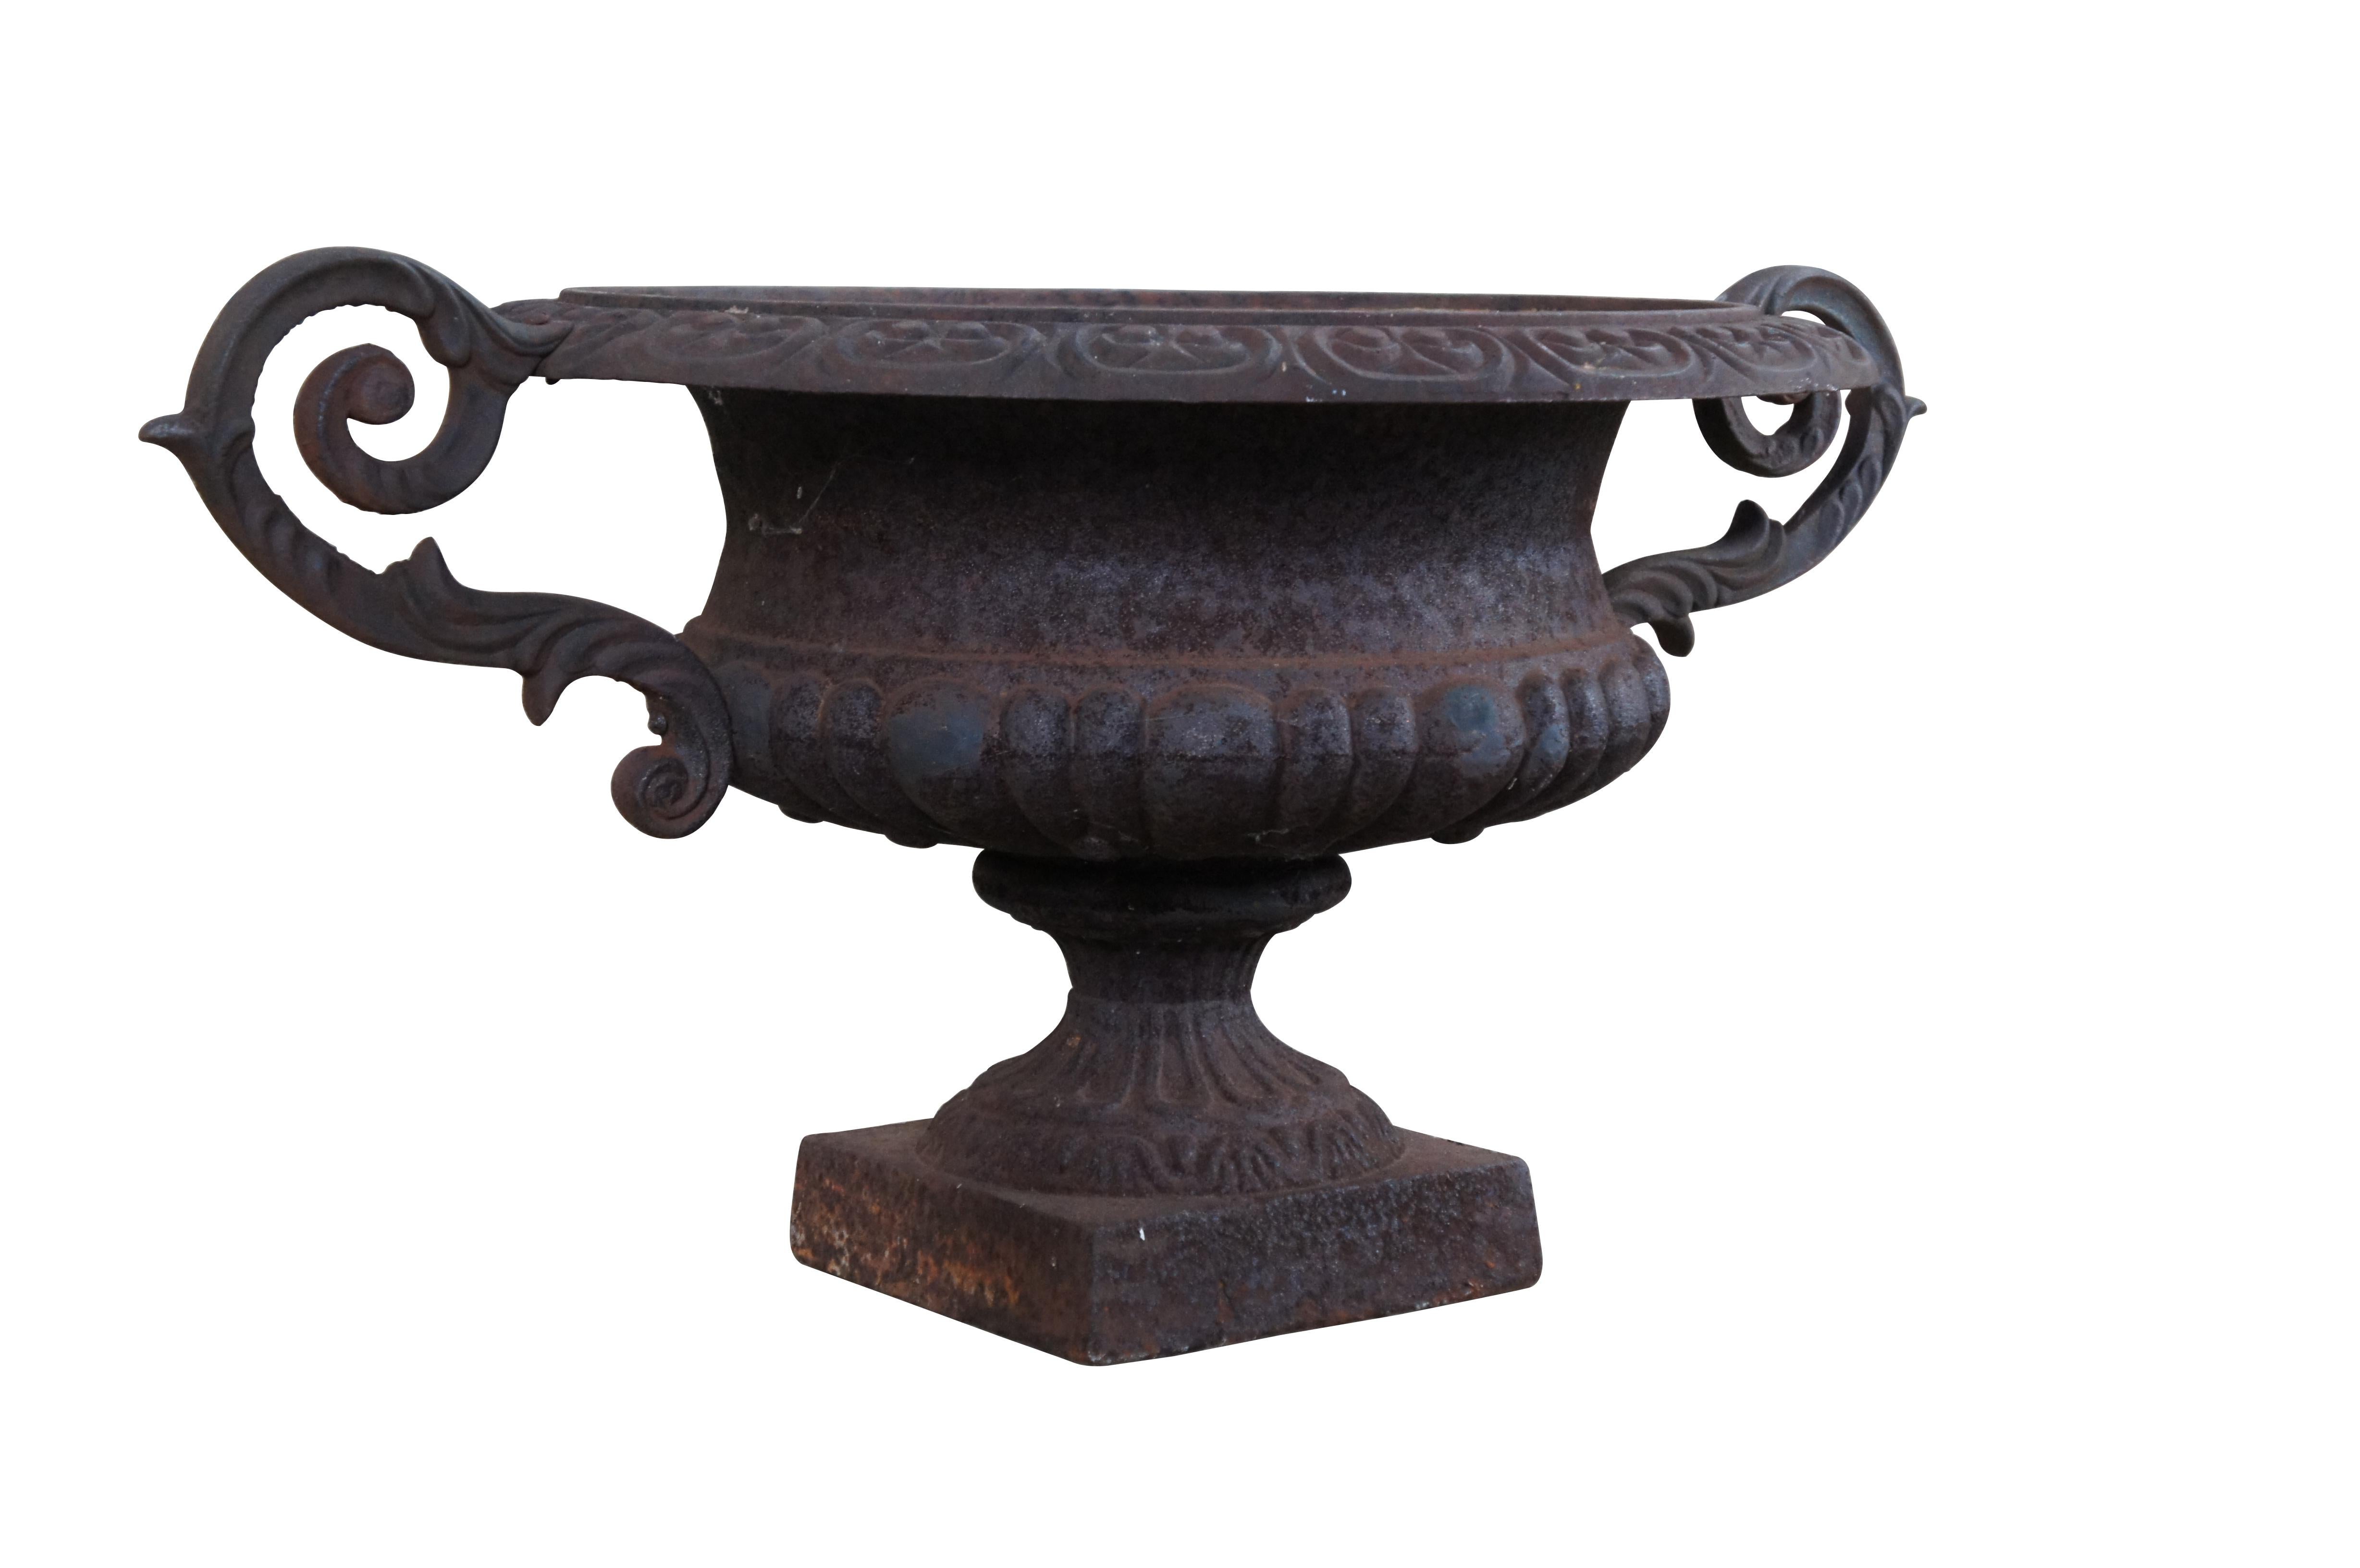 Antique cast iron garden urn or planter with ornate scrolled handles and square pedestal base.  

Dimensions:
35